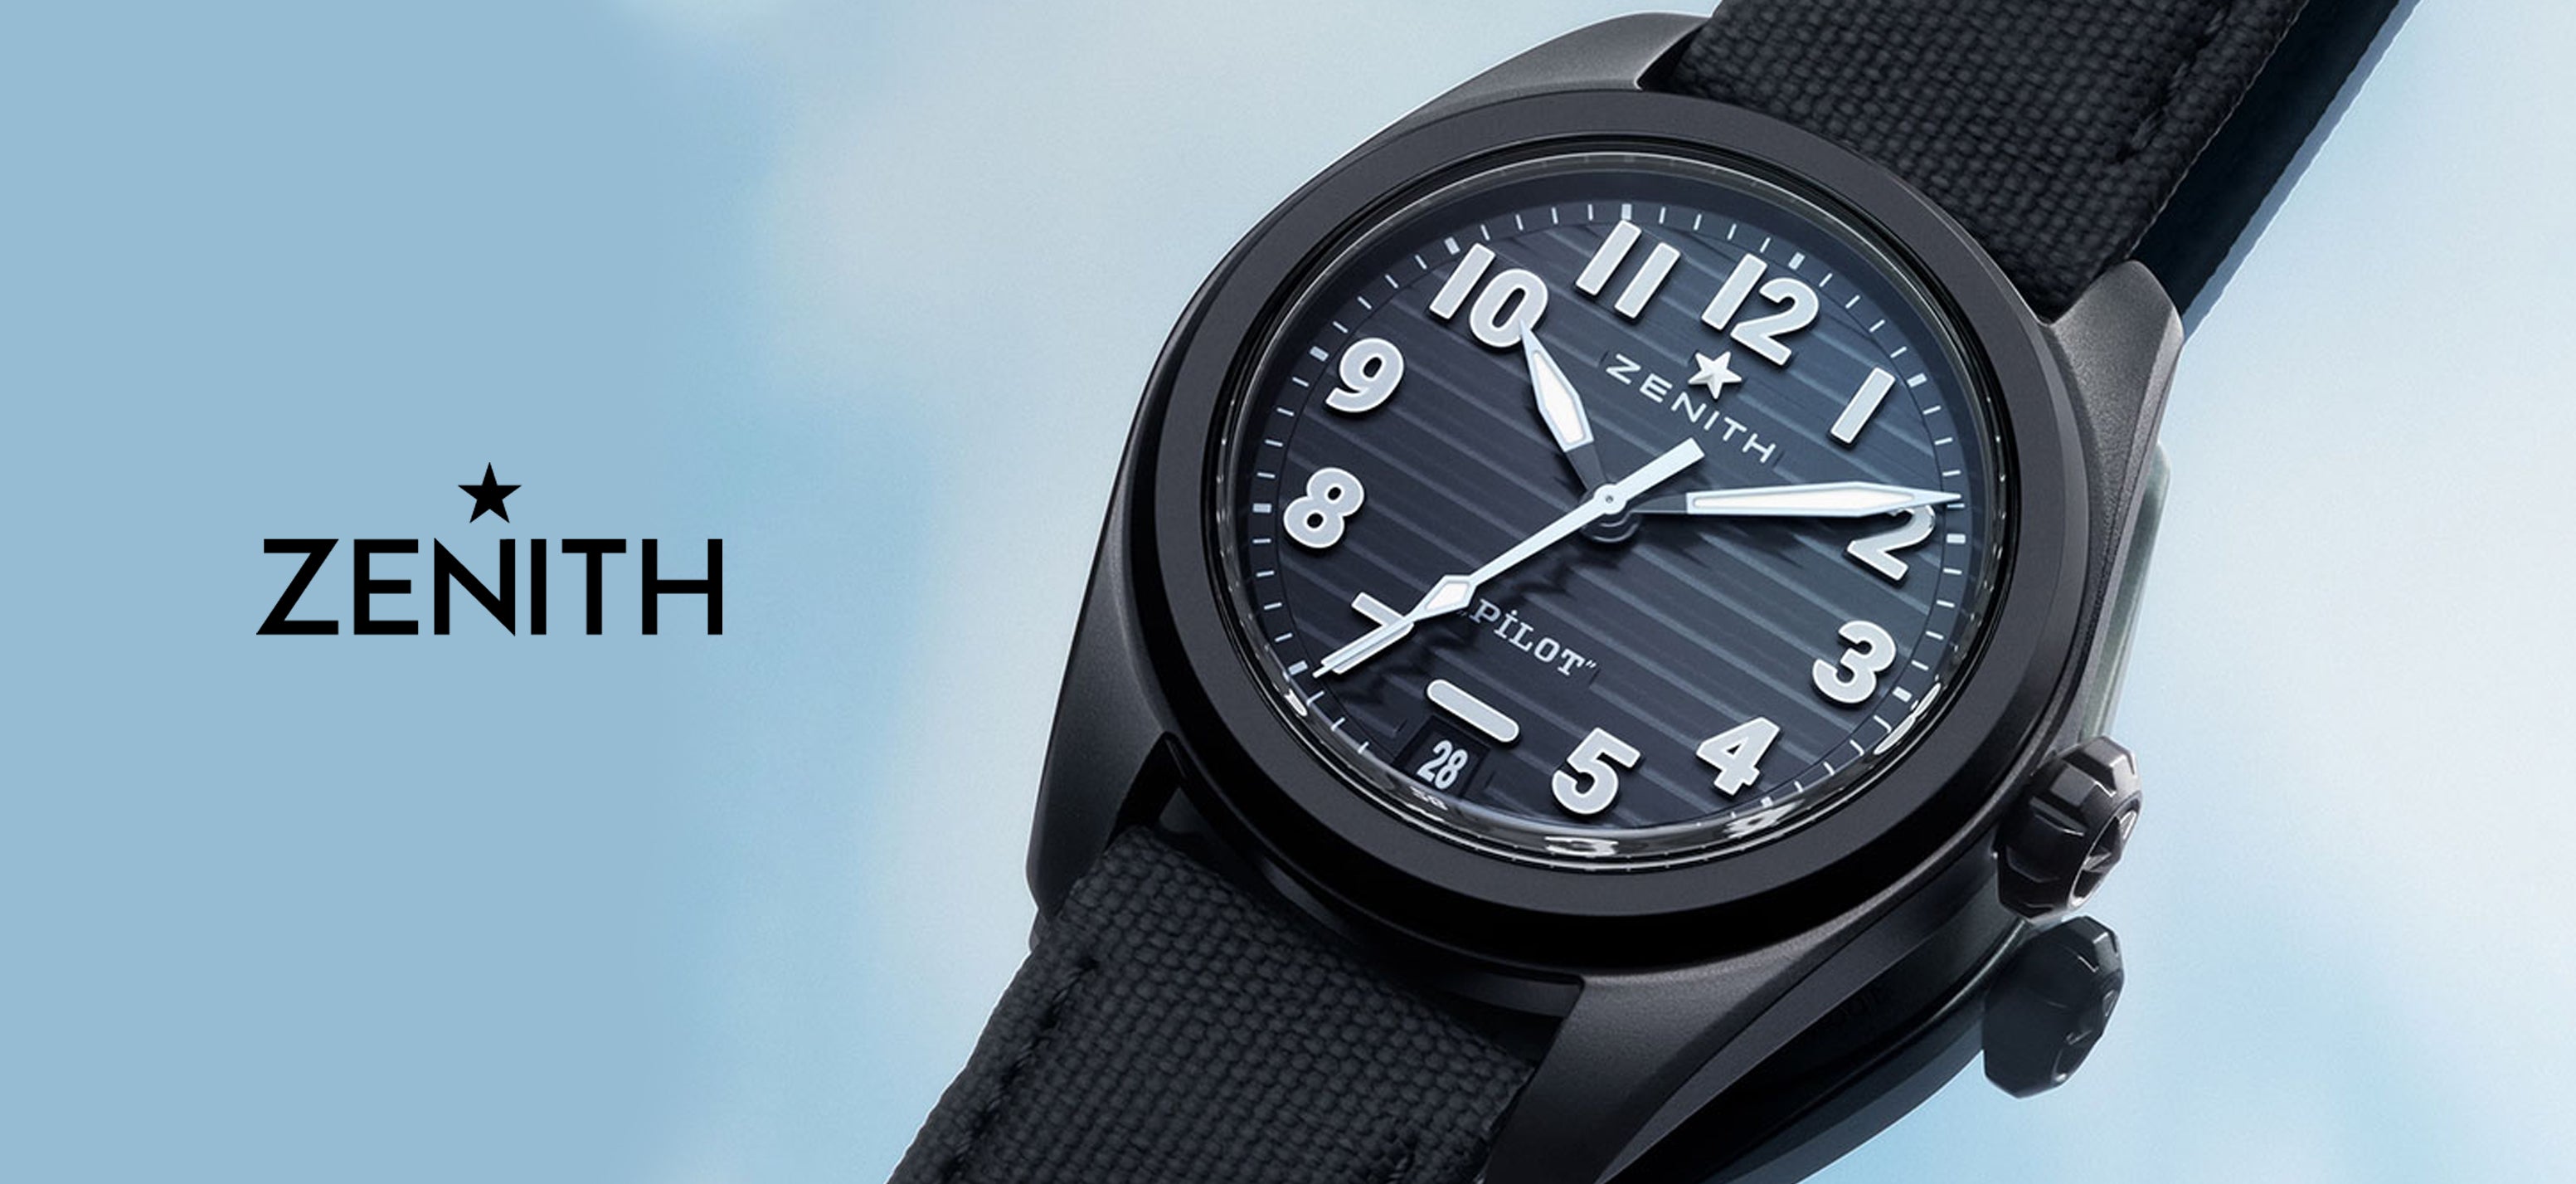 Zenith, Watches Of Switzerland Showcase Pilot Legacy Pop-Up Store -  ATimelyPerspective